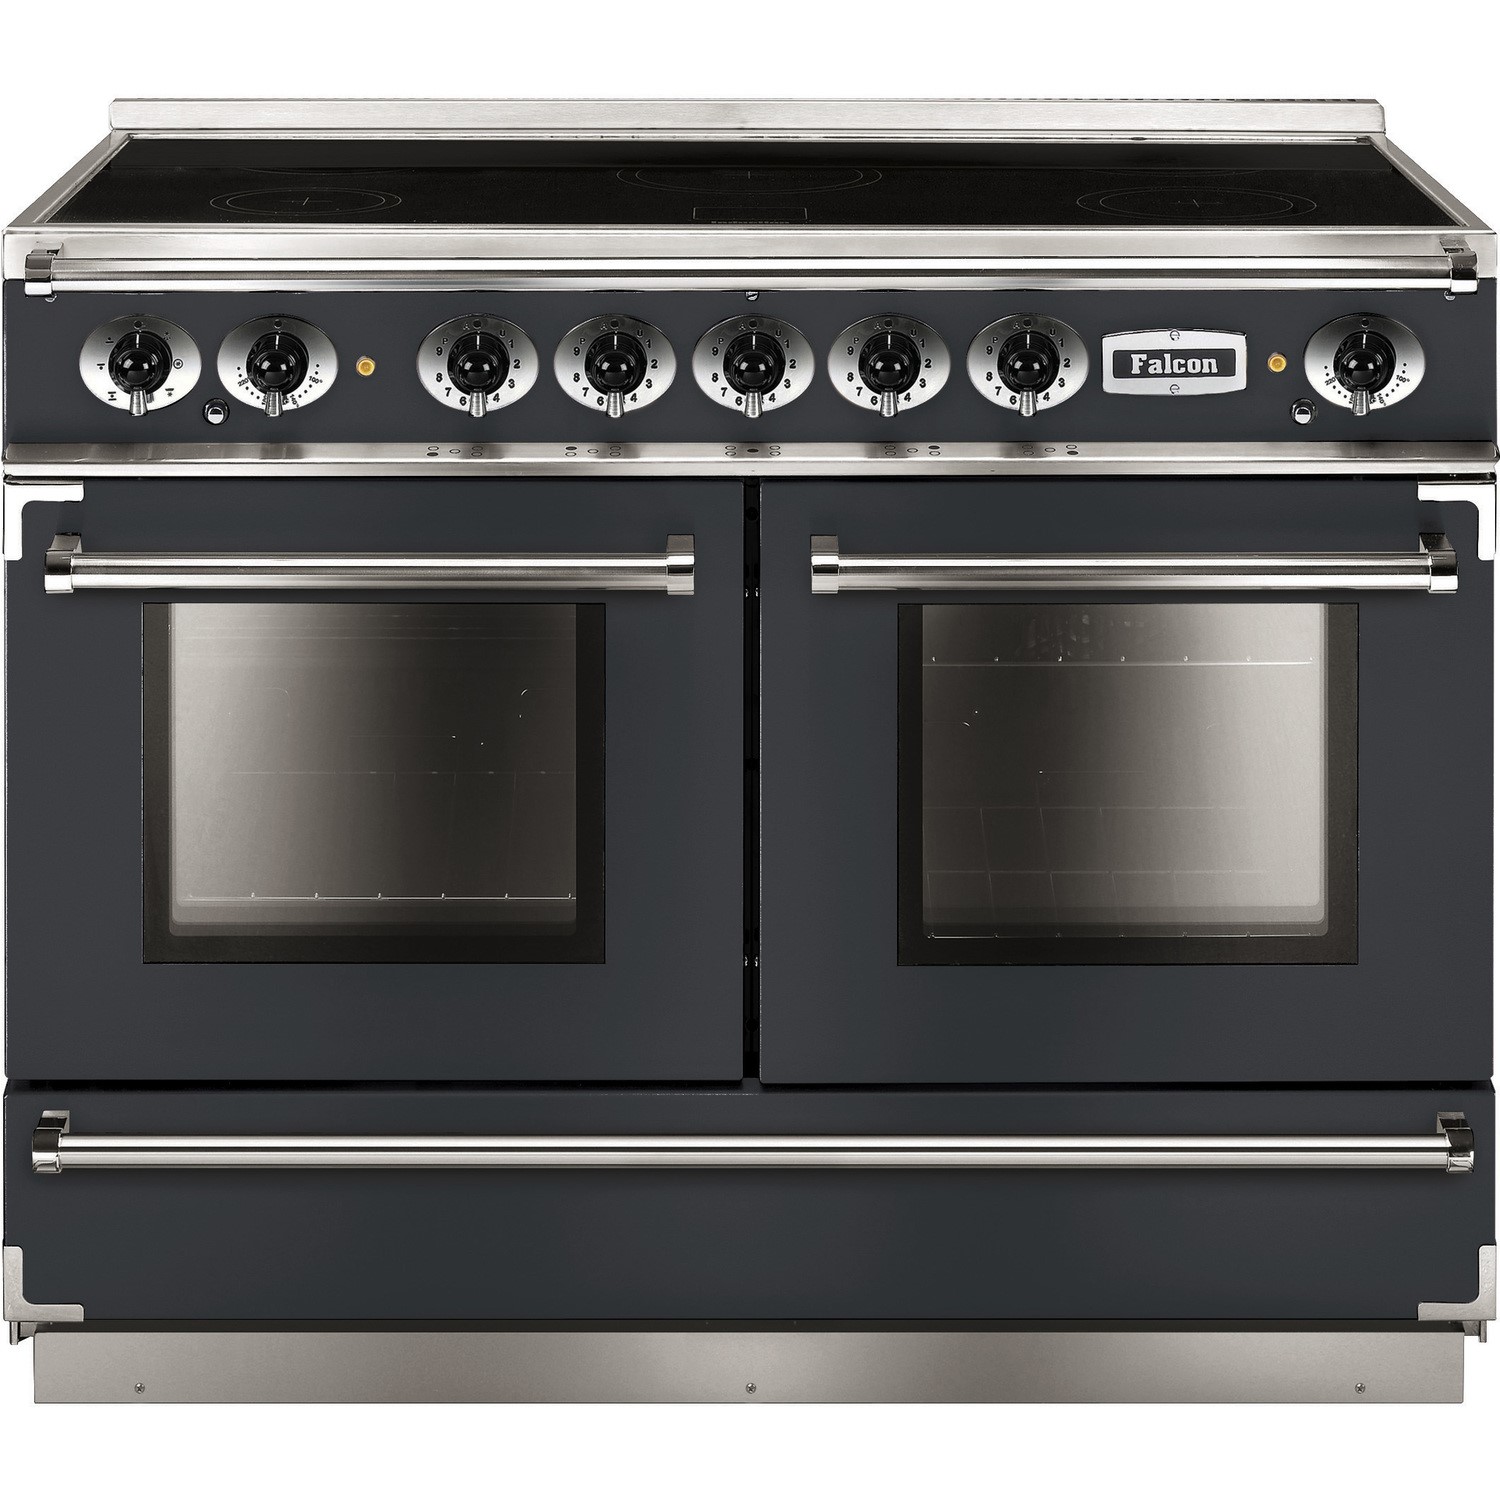 Falcon Continental 110cm Electric Range Cooker with Induction Hob - Slate Grey